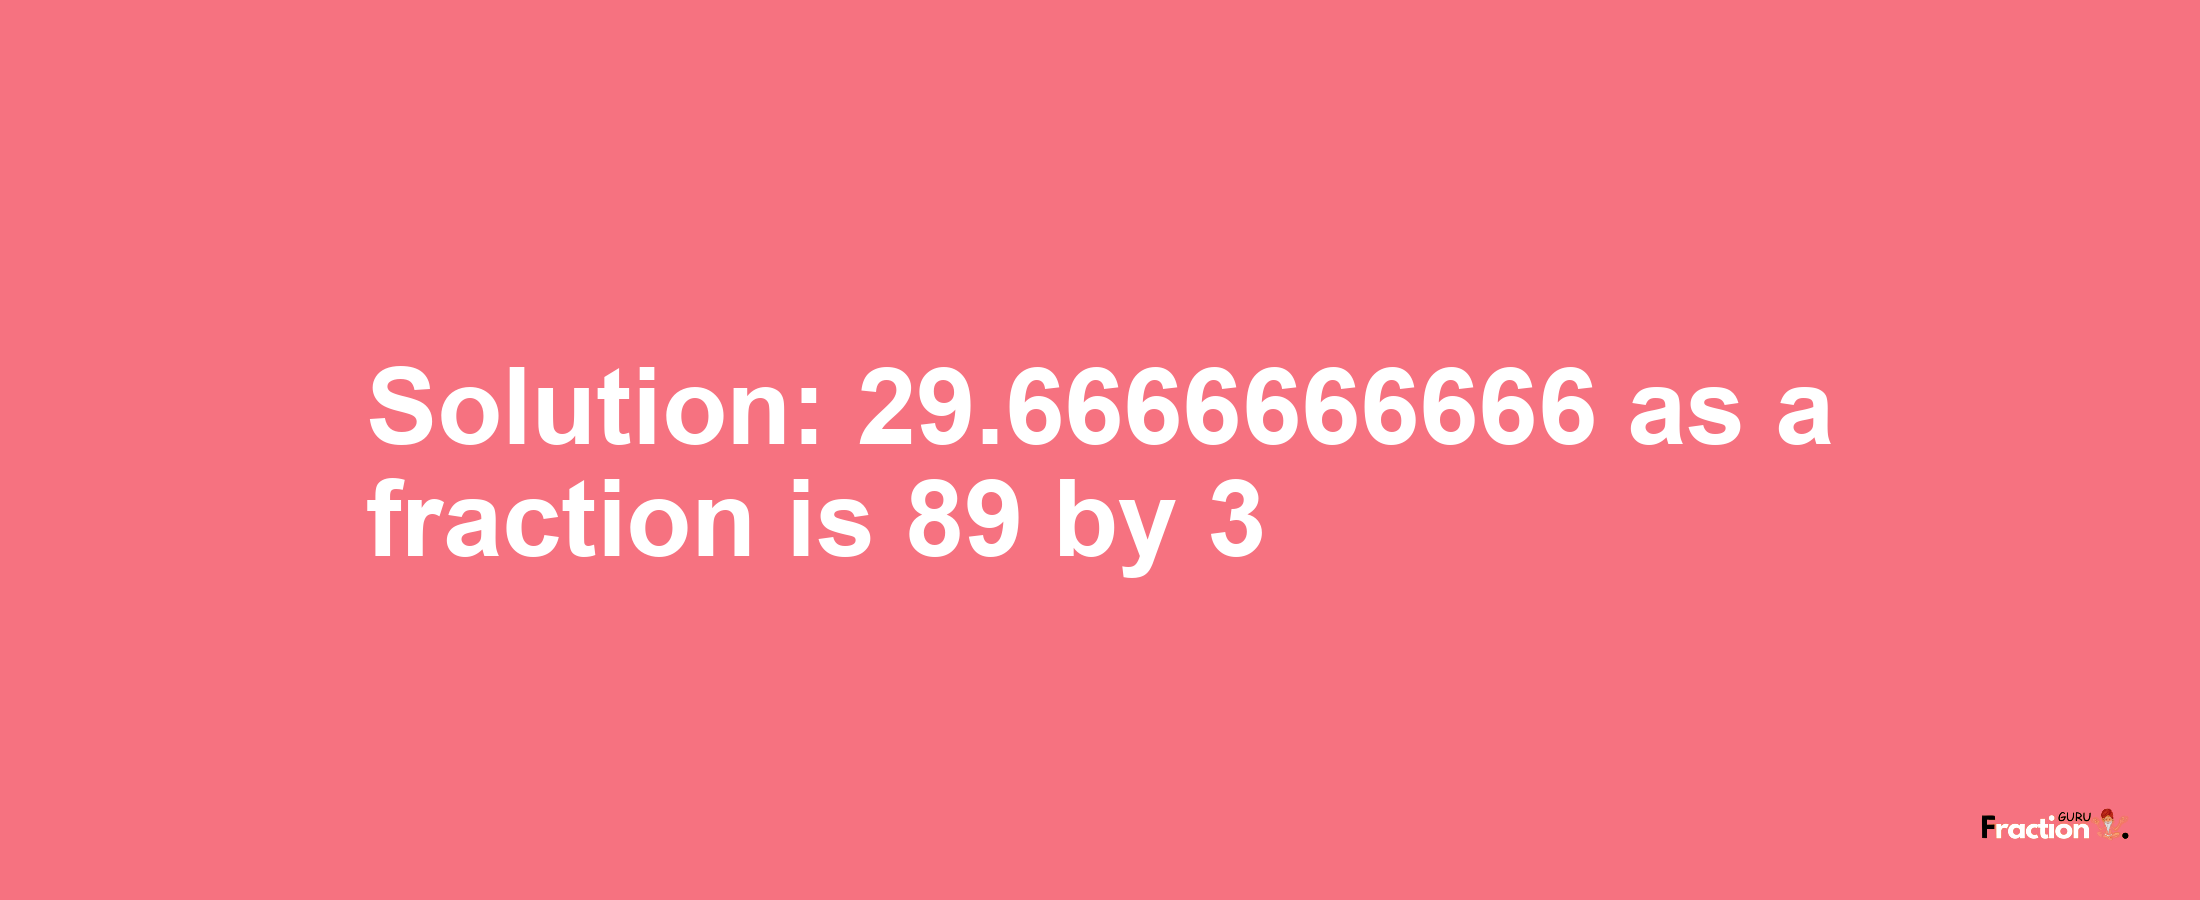 Solution:29.6666666666 as a fraction is 89/3